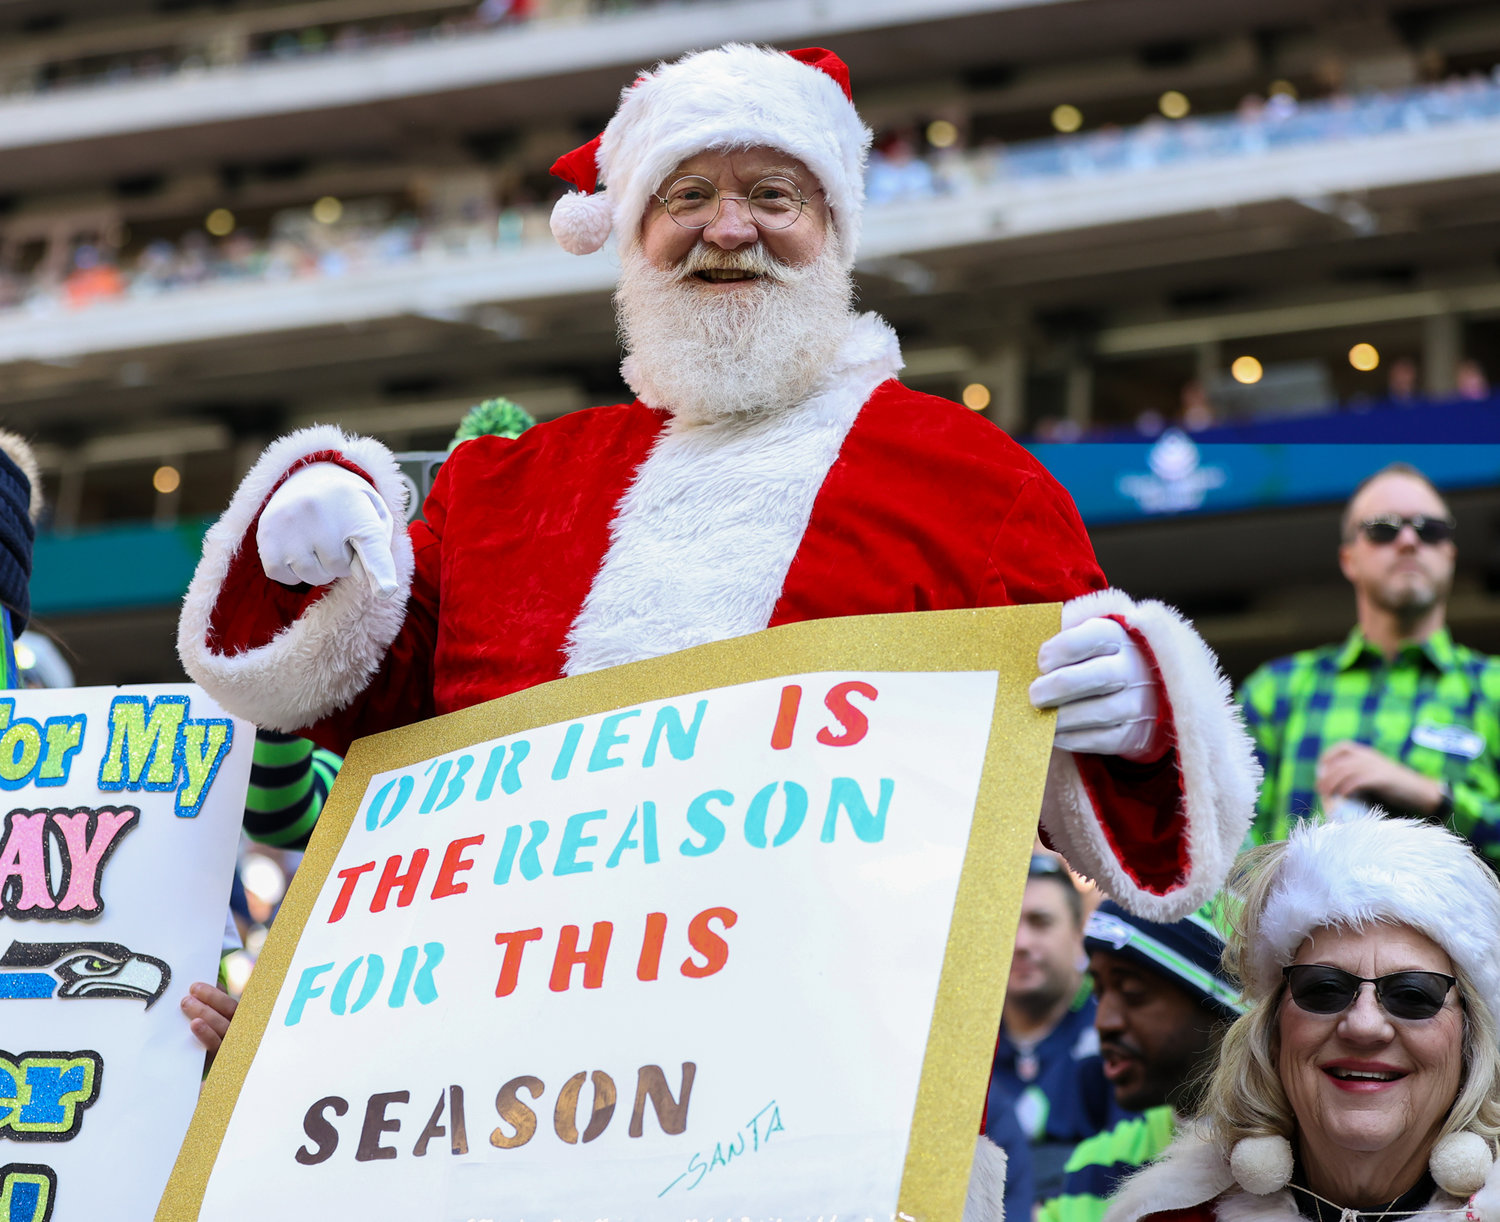 A Houston Texans fan dressed as Santa Claus holds a sign during the first half of an NFL game between the Seahawks and the Texans on December 12, 2021 in Houston, Texas.